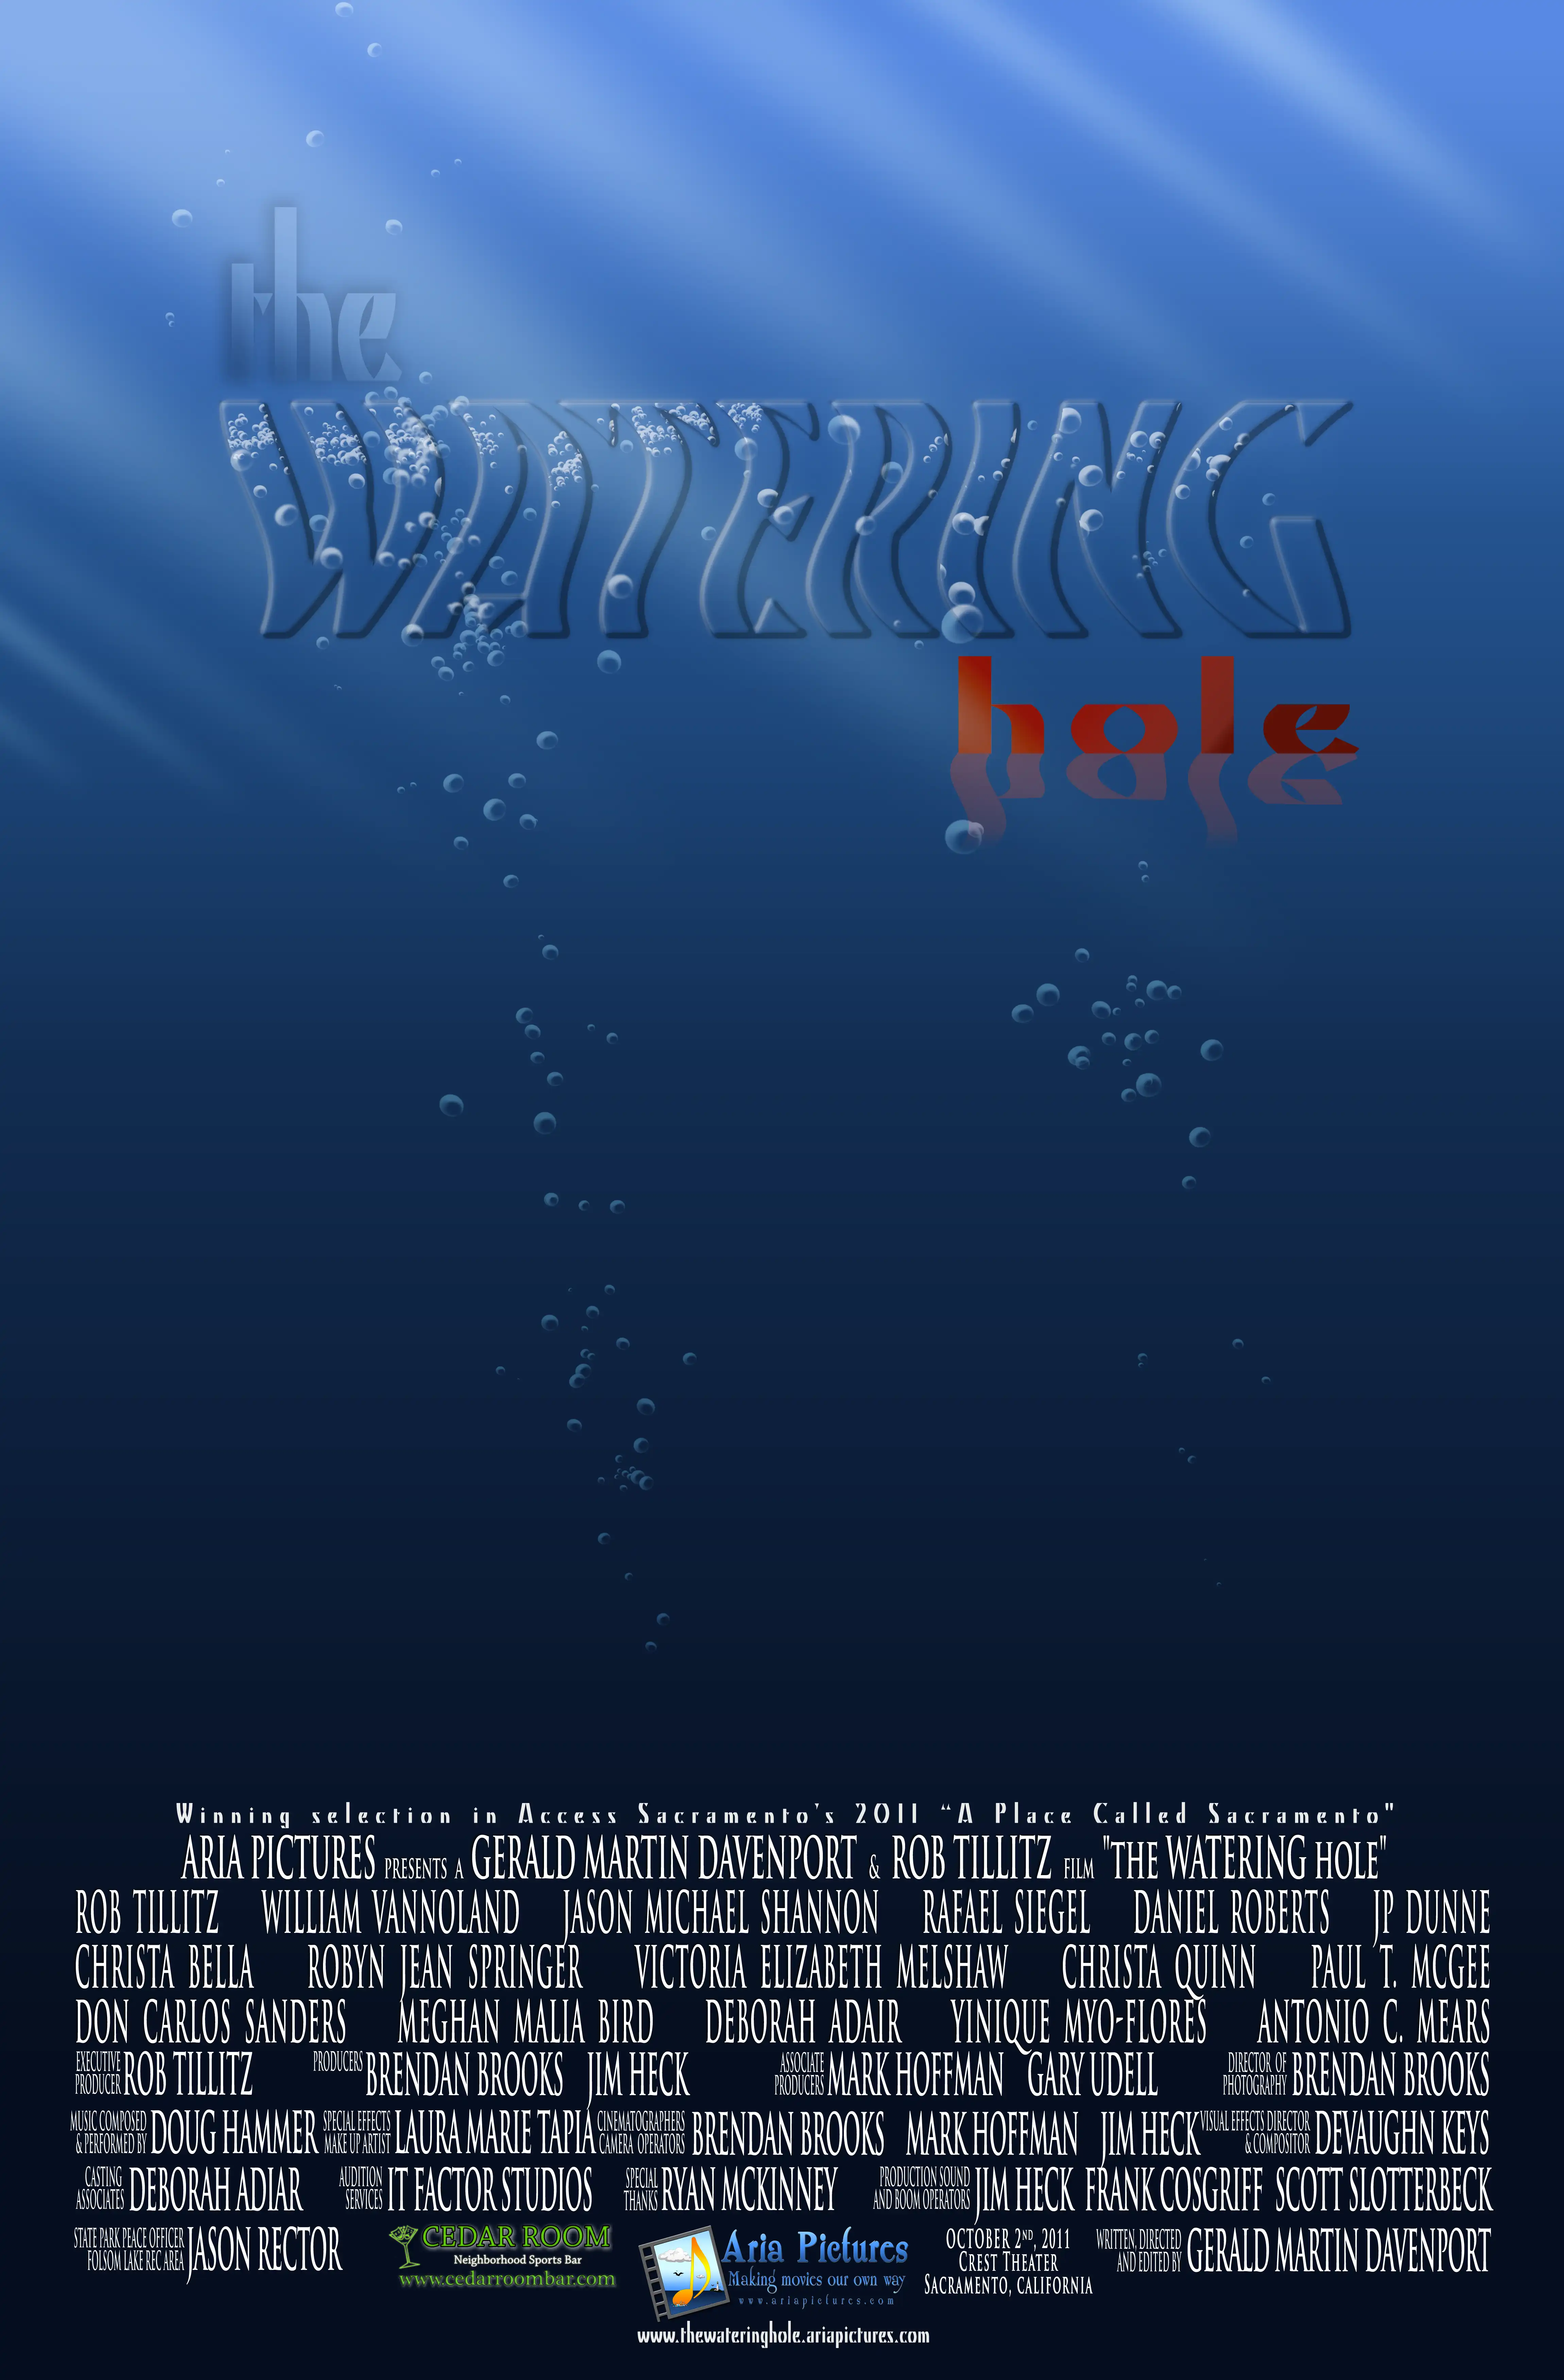 Official movie poster for the WATERING hole (2011).